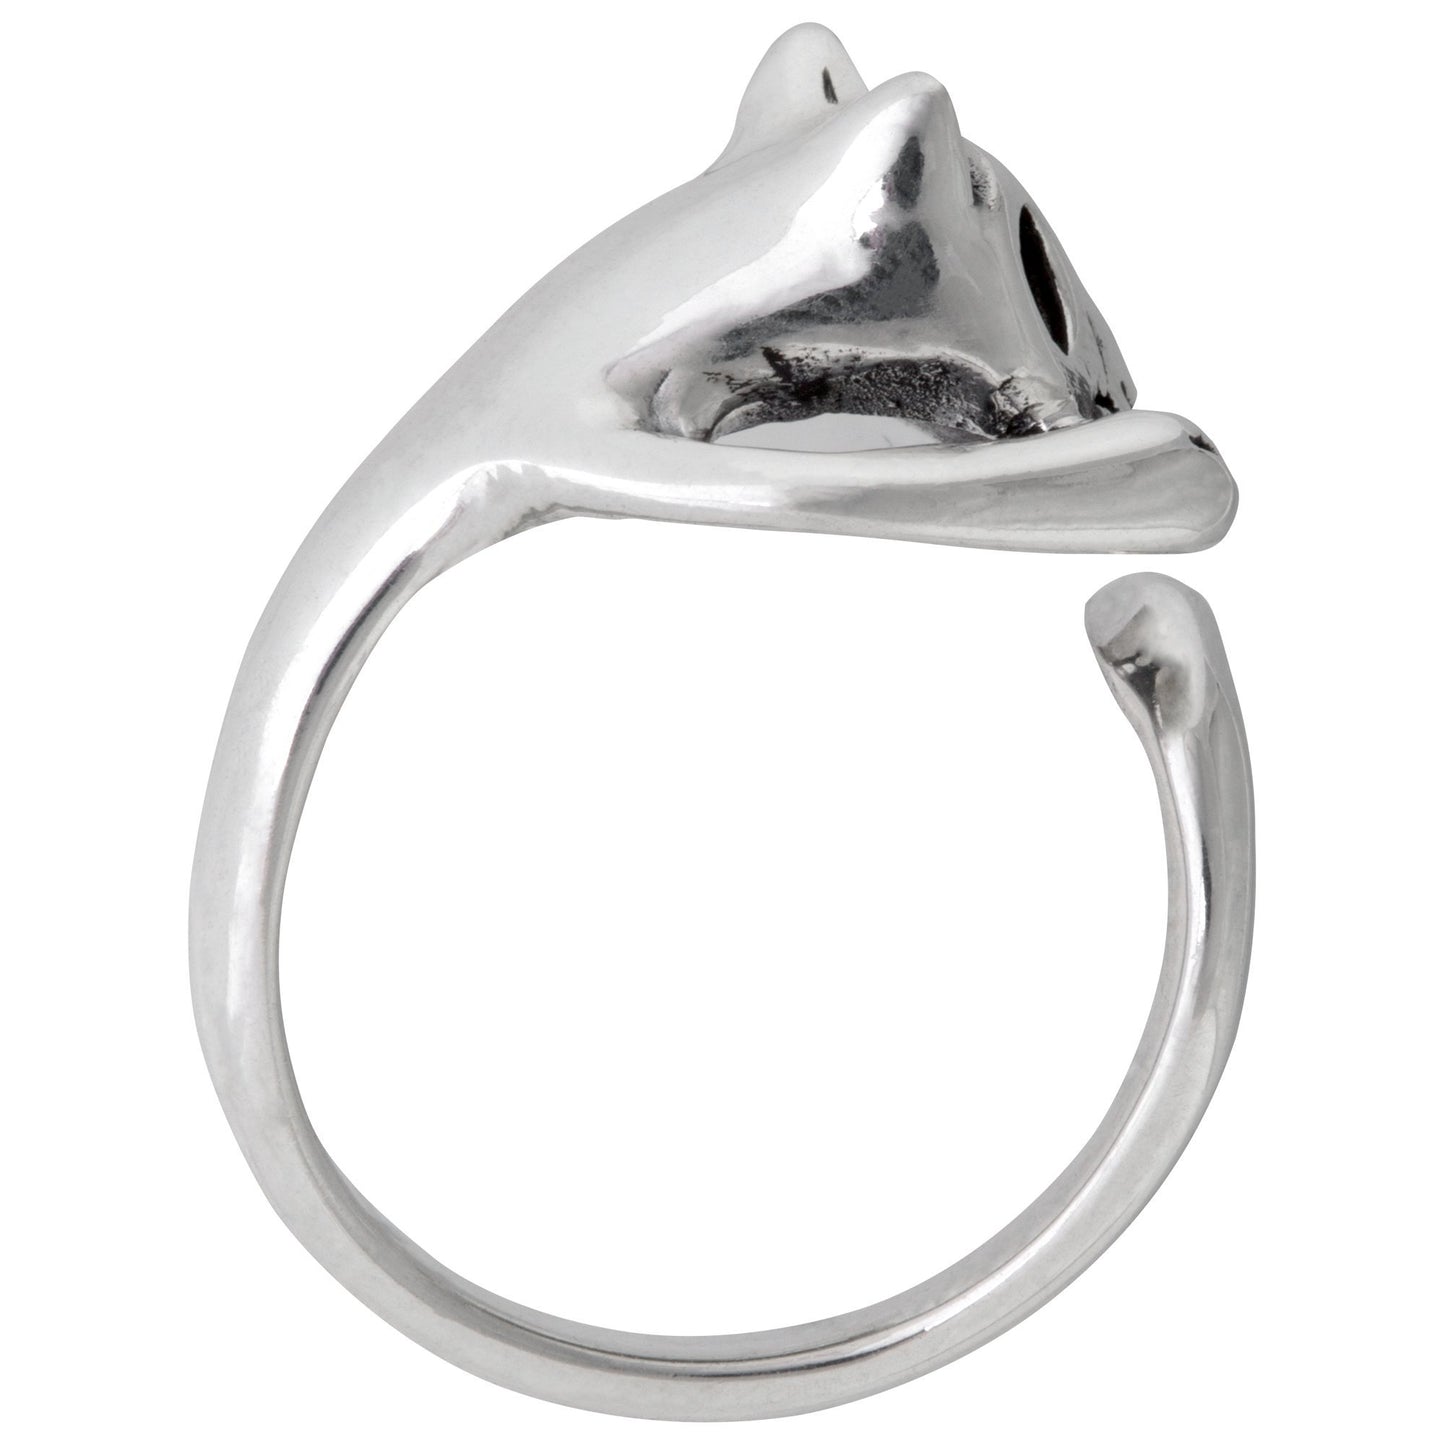 Cat Sterling Wrap Ring